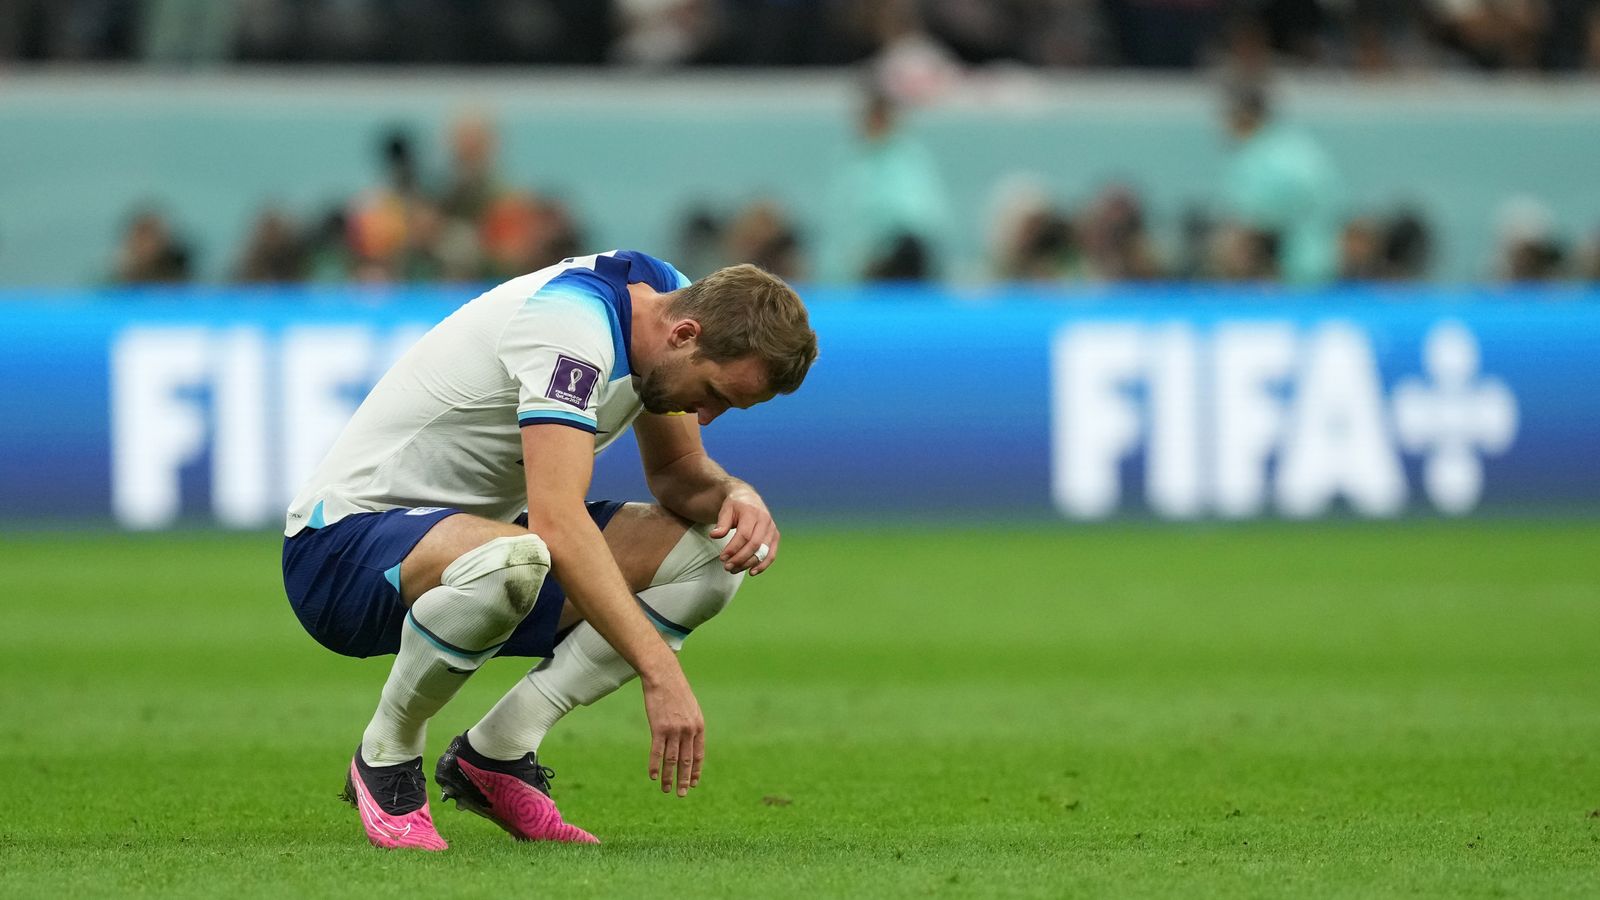 Qatar World Cup: Harry Kane takes responsibility for England exit as Gareth Southgate to take time to decide future